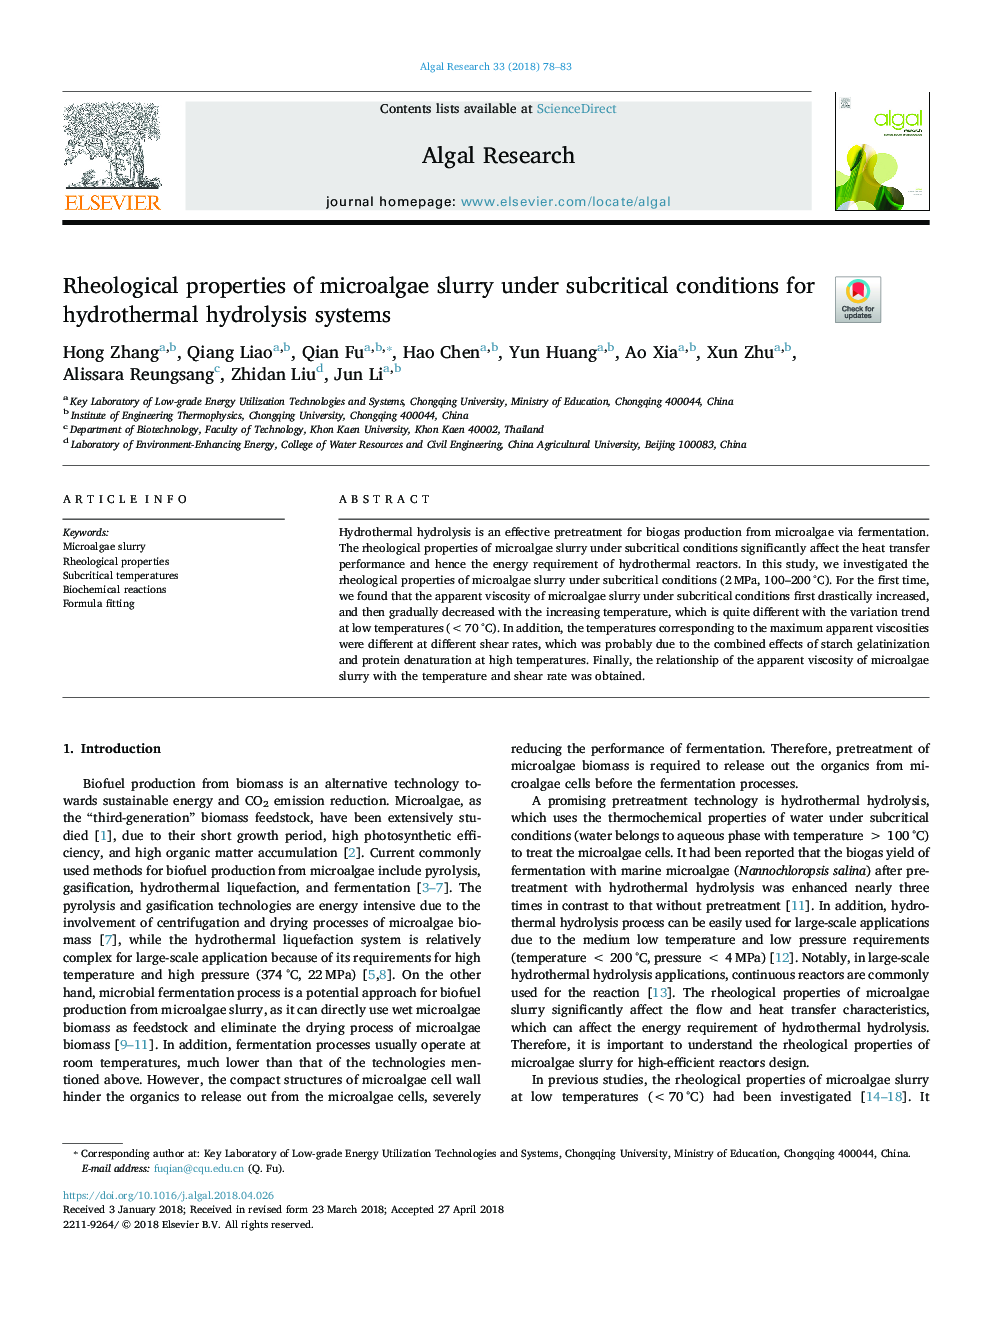 Rheological properties of microalgae slurry under subcritical conditions for hydrothermal hydrolysis systems